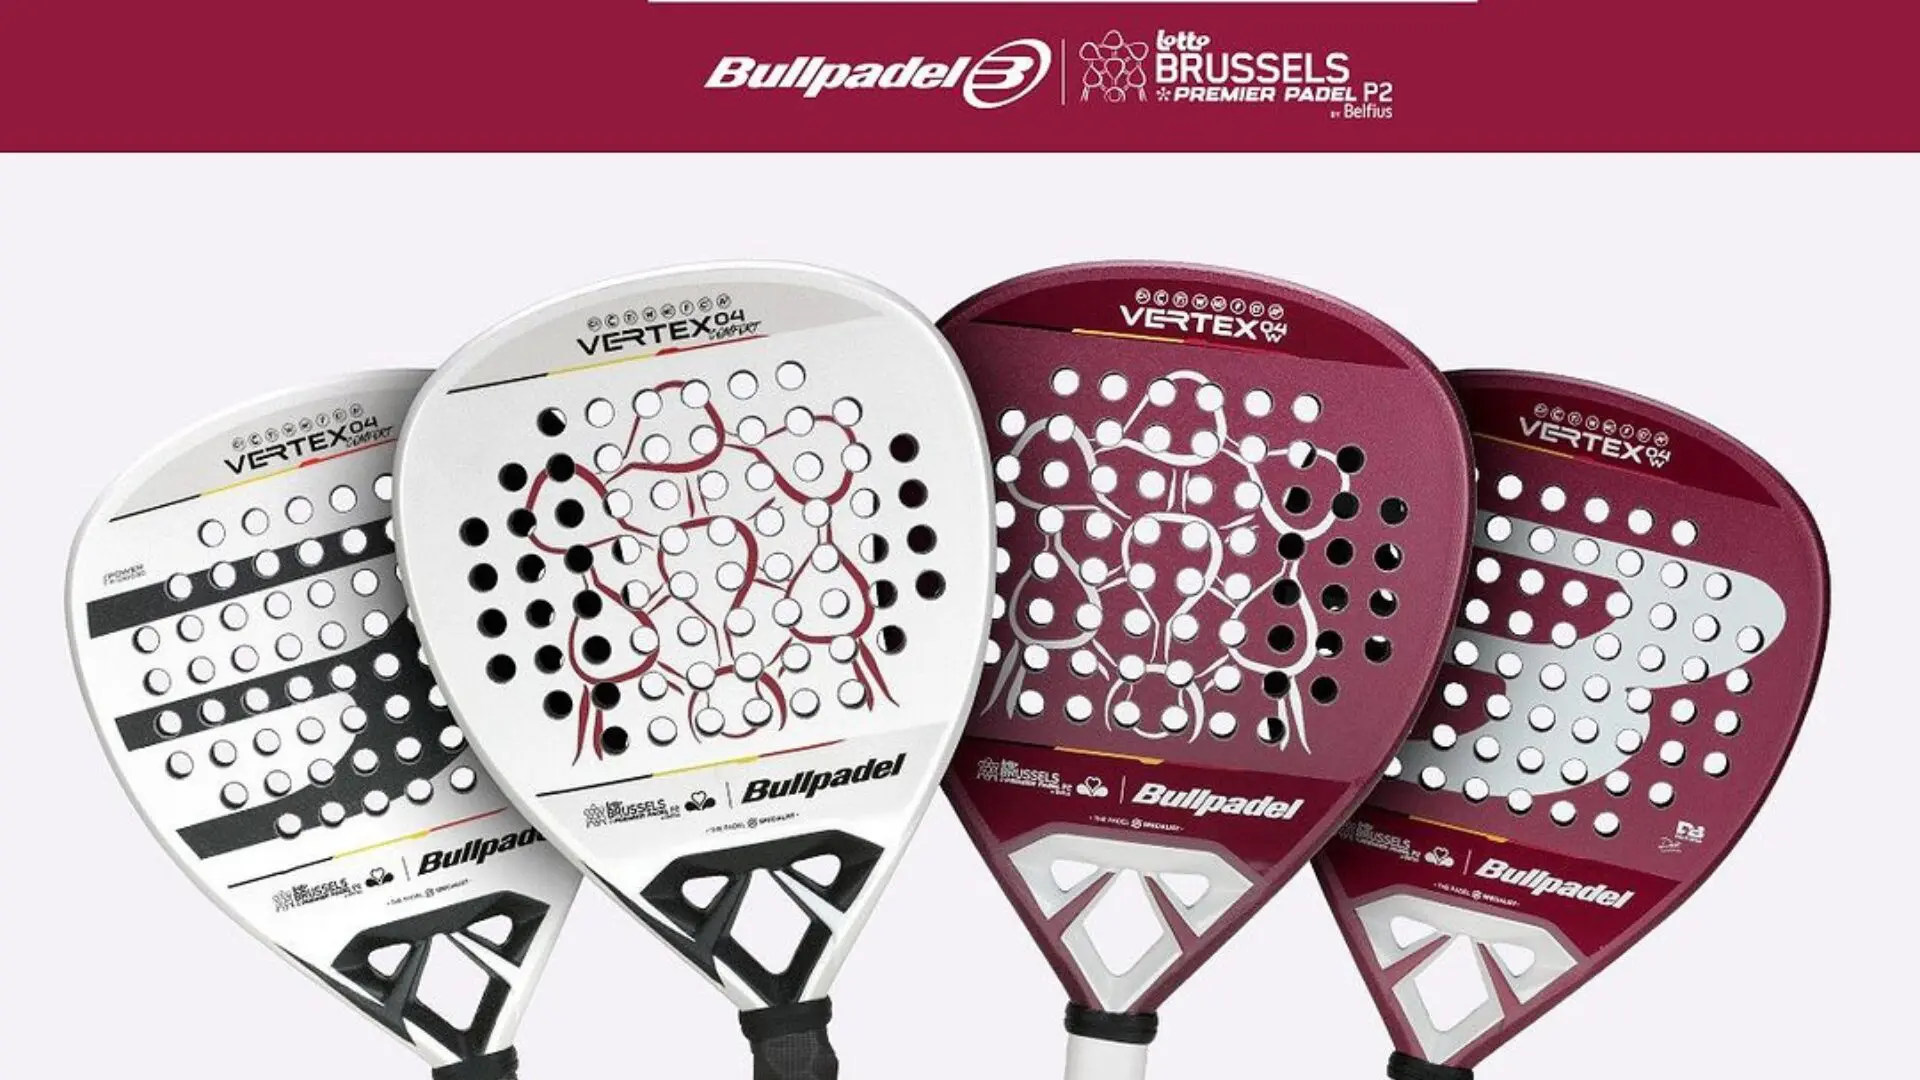 Bullpadel presents the official palas of the Premier Padel Brussels P2!